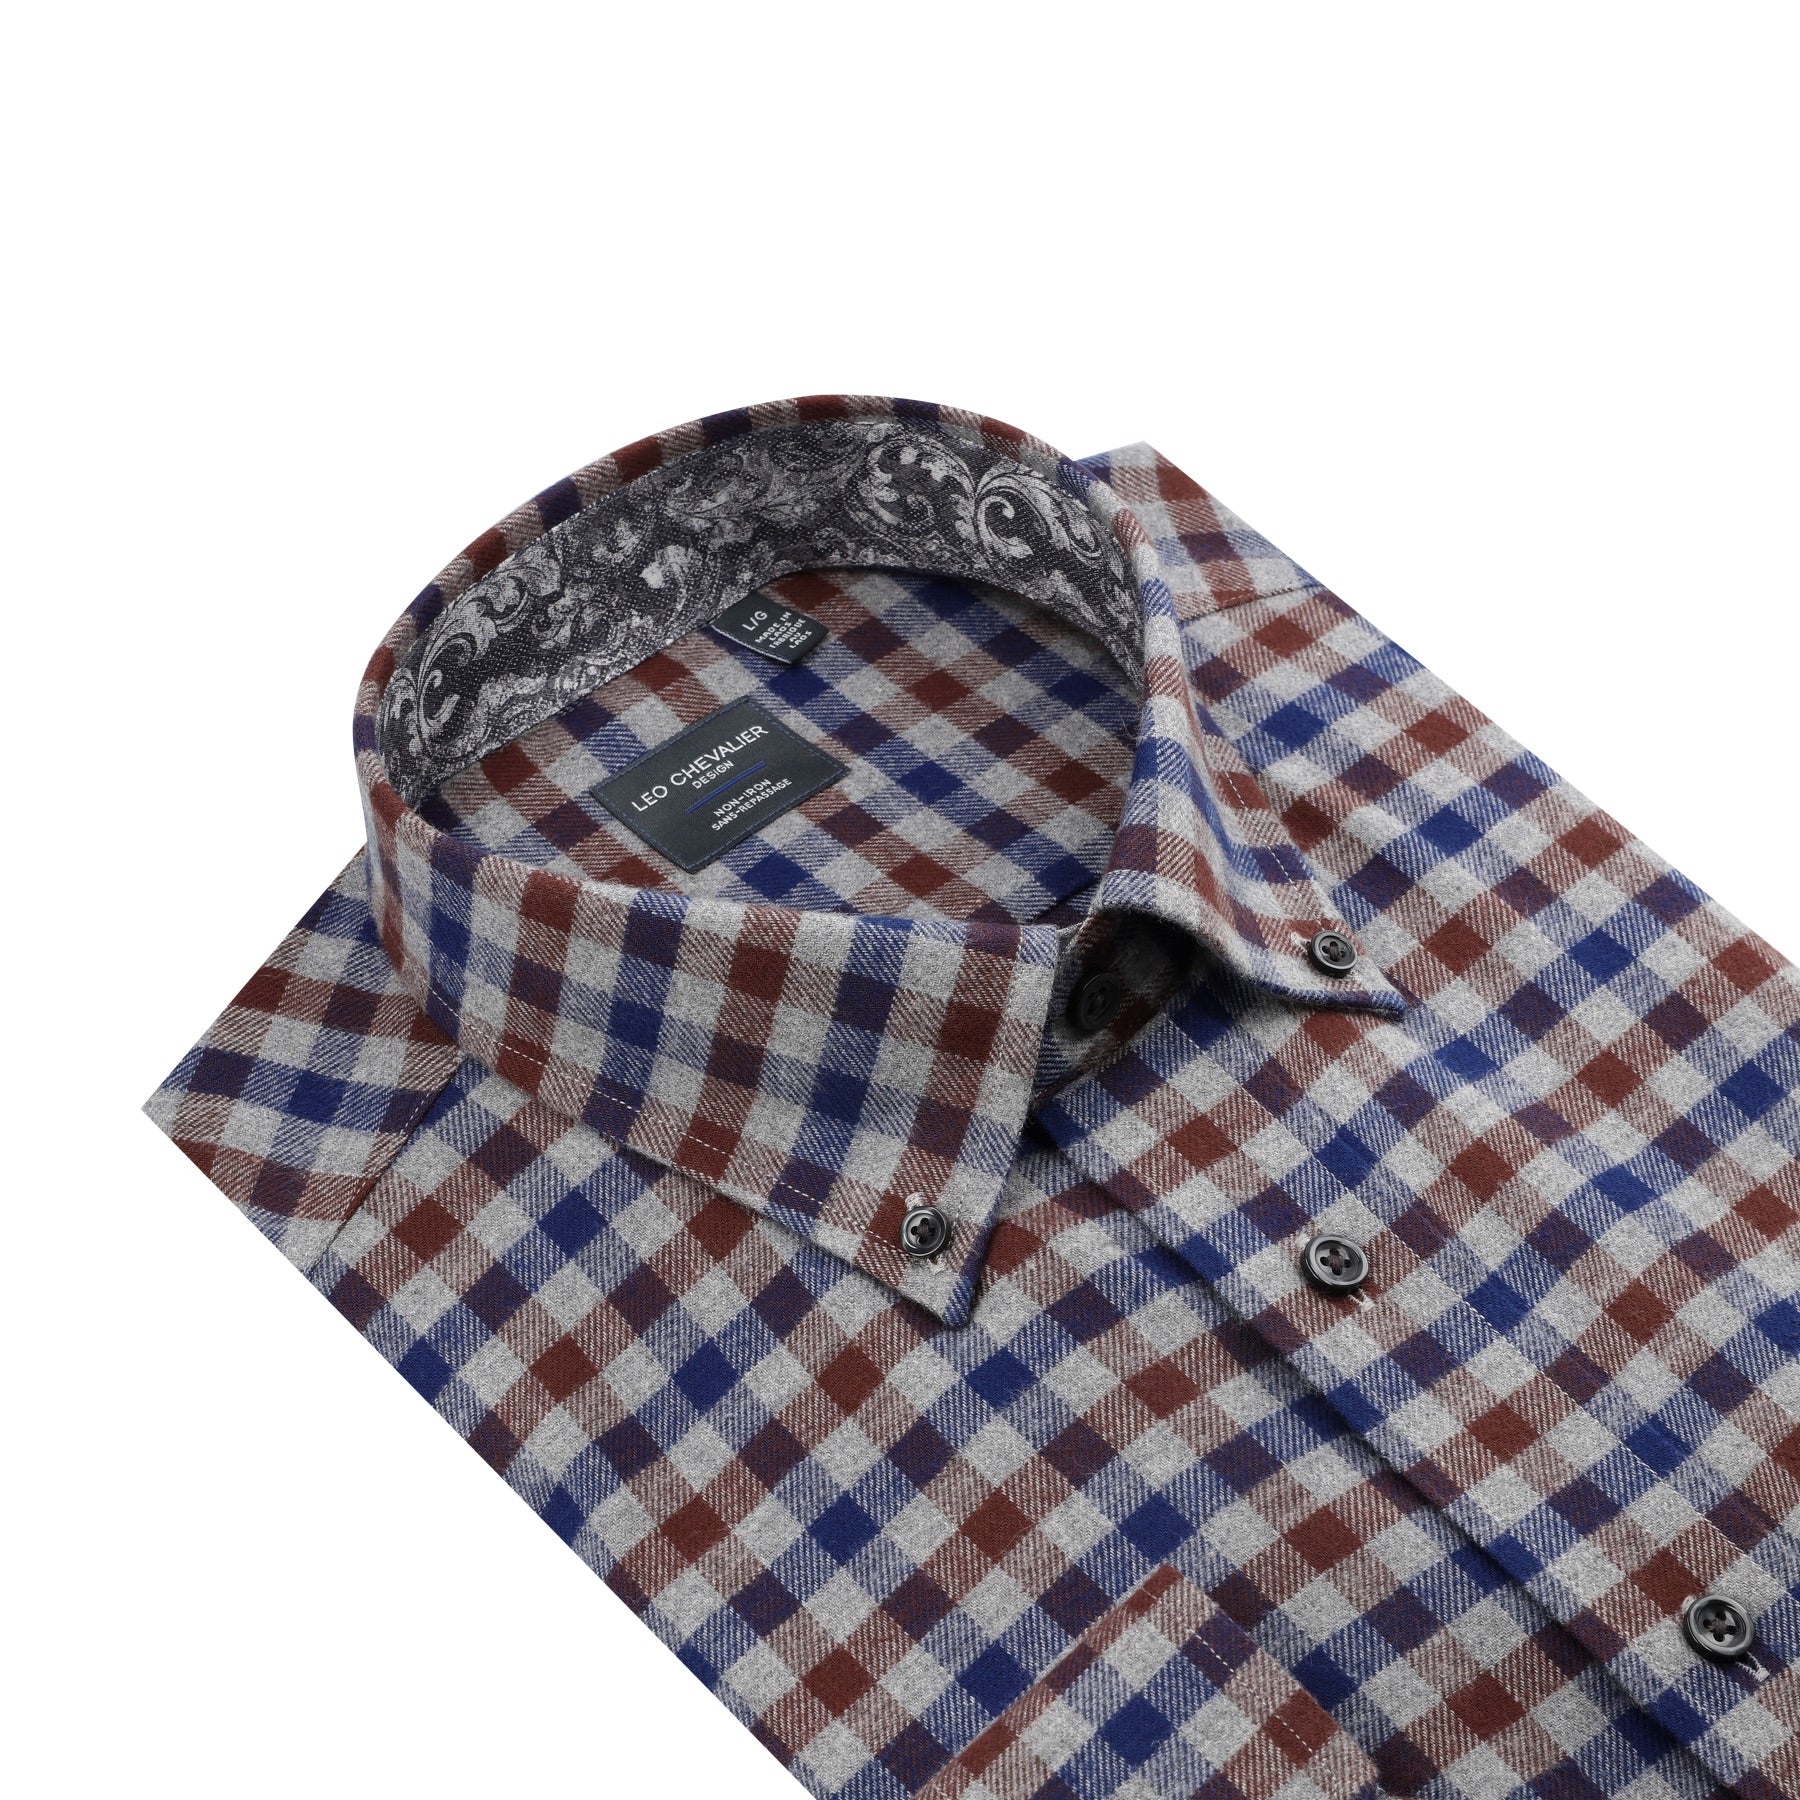 Grey, Blue, and Brown Check No-Iron Brushed Cotton Sport Shirt with Button Down Collar by Leo Chevalier